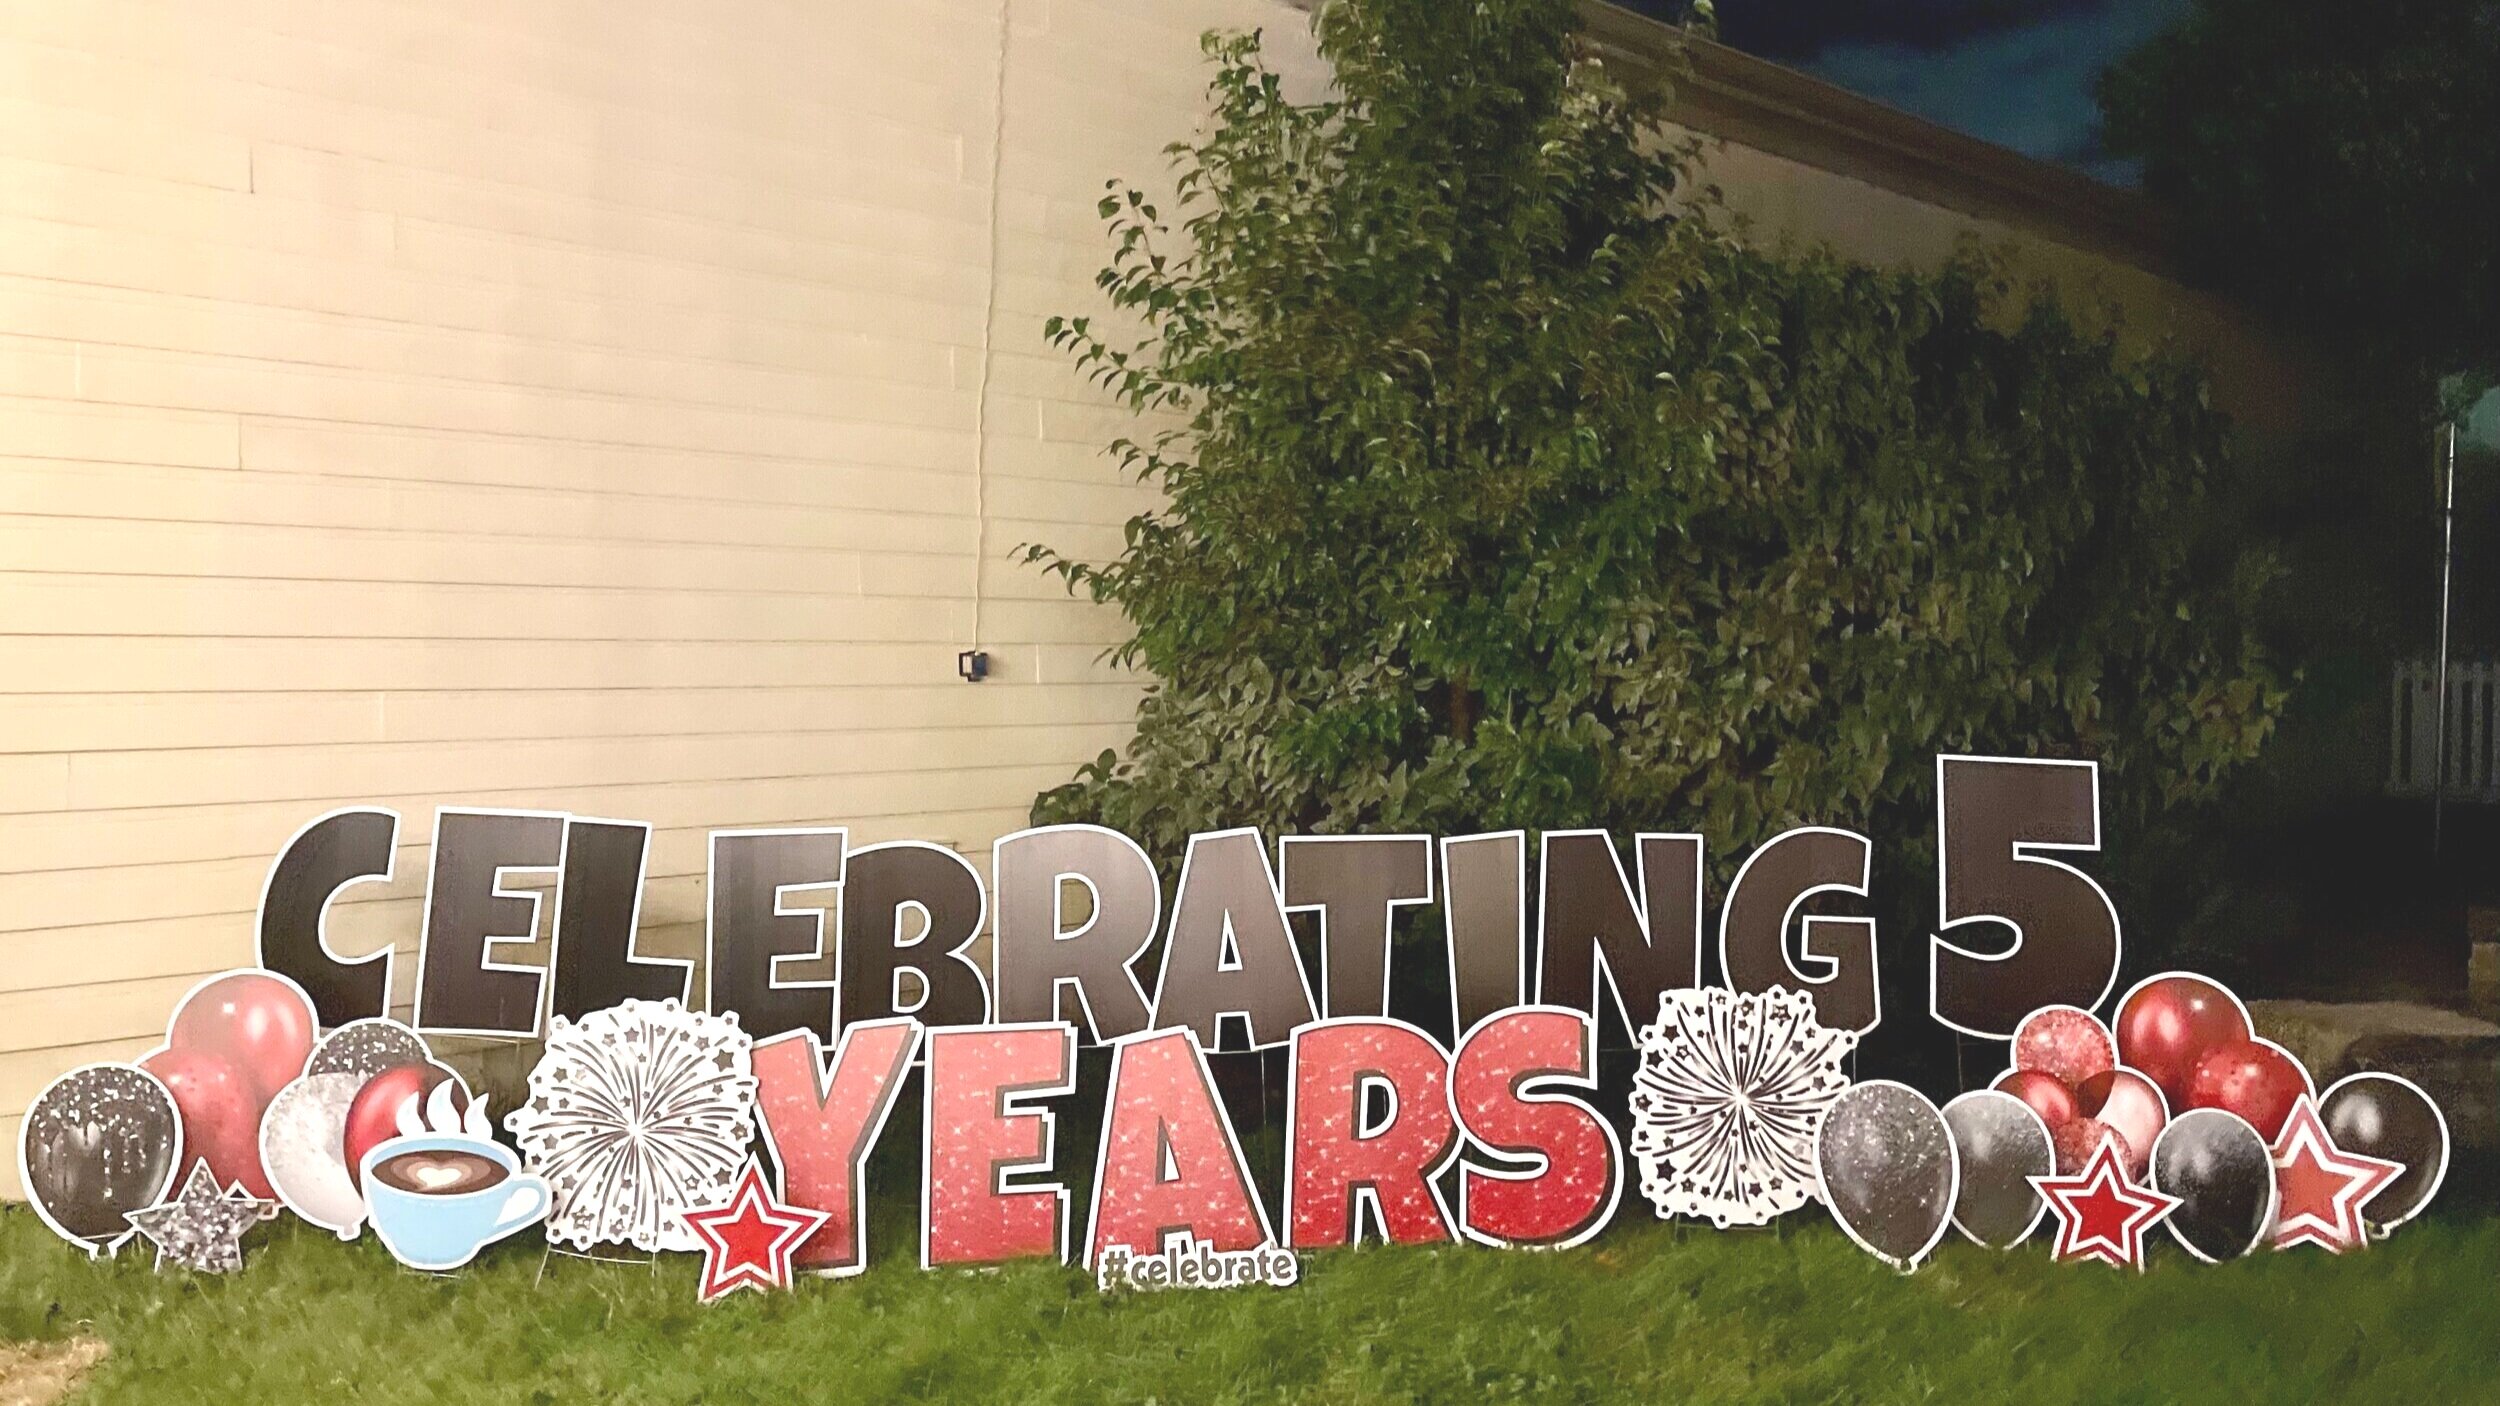 Celebrating Years in Business Yard Sign